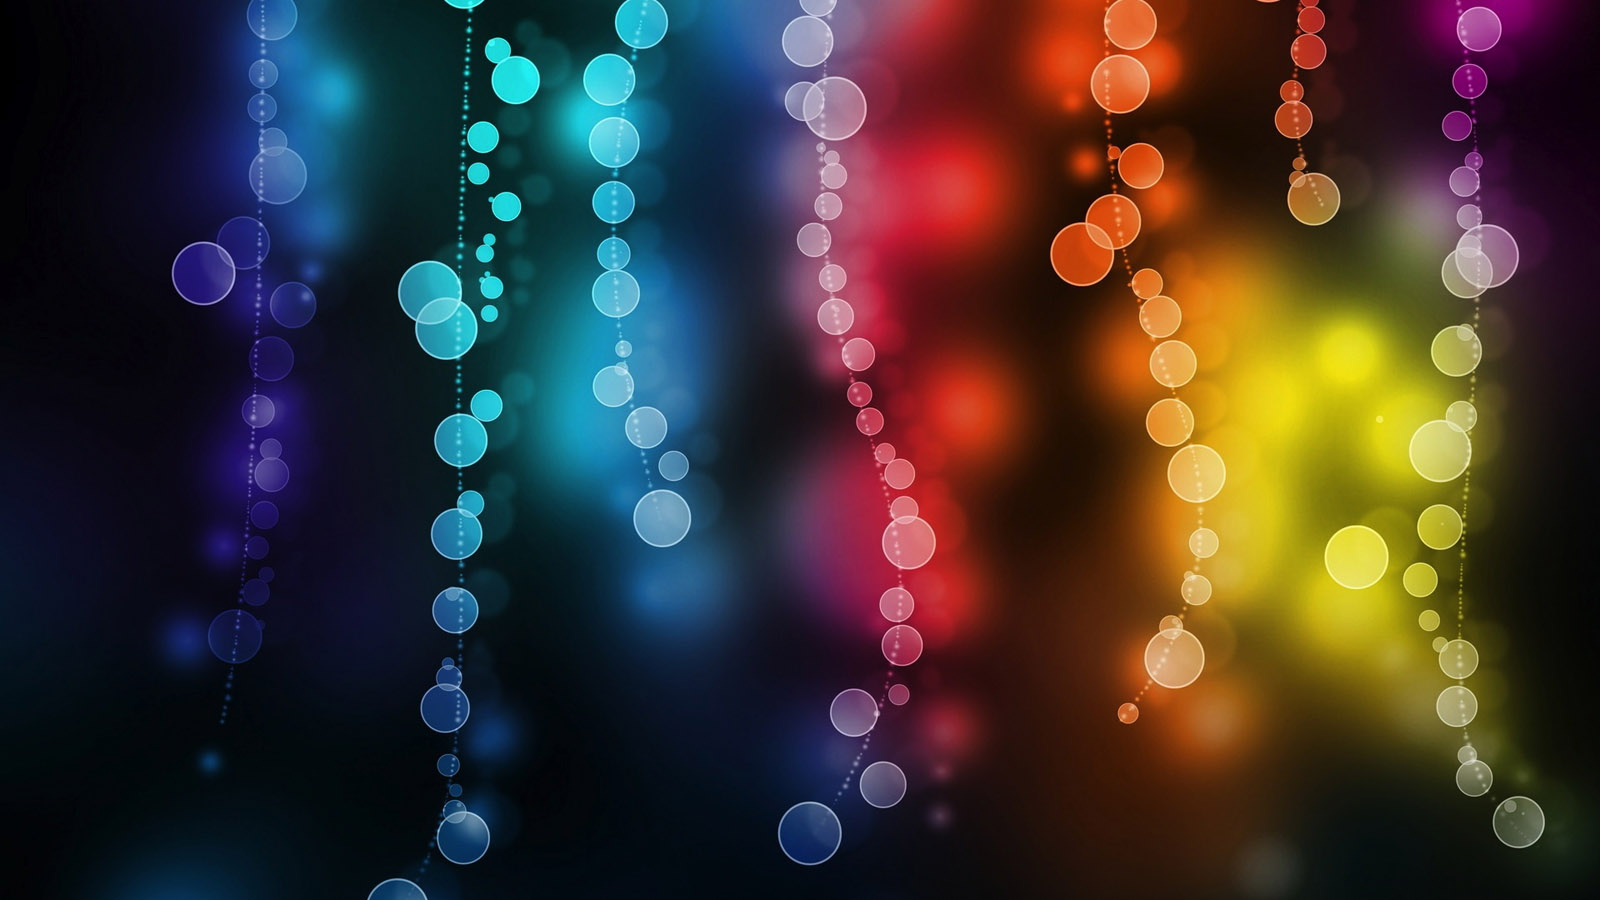 Download colorful hanging lights wallpaper. Other sizes: Small \ Medium \ Large \ Full Size